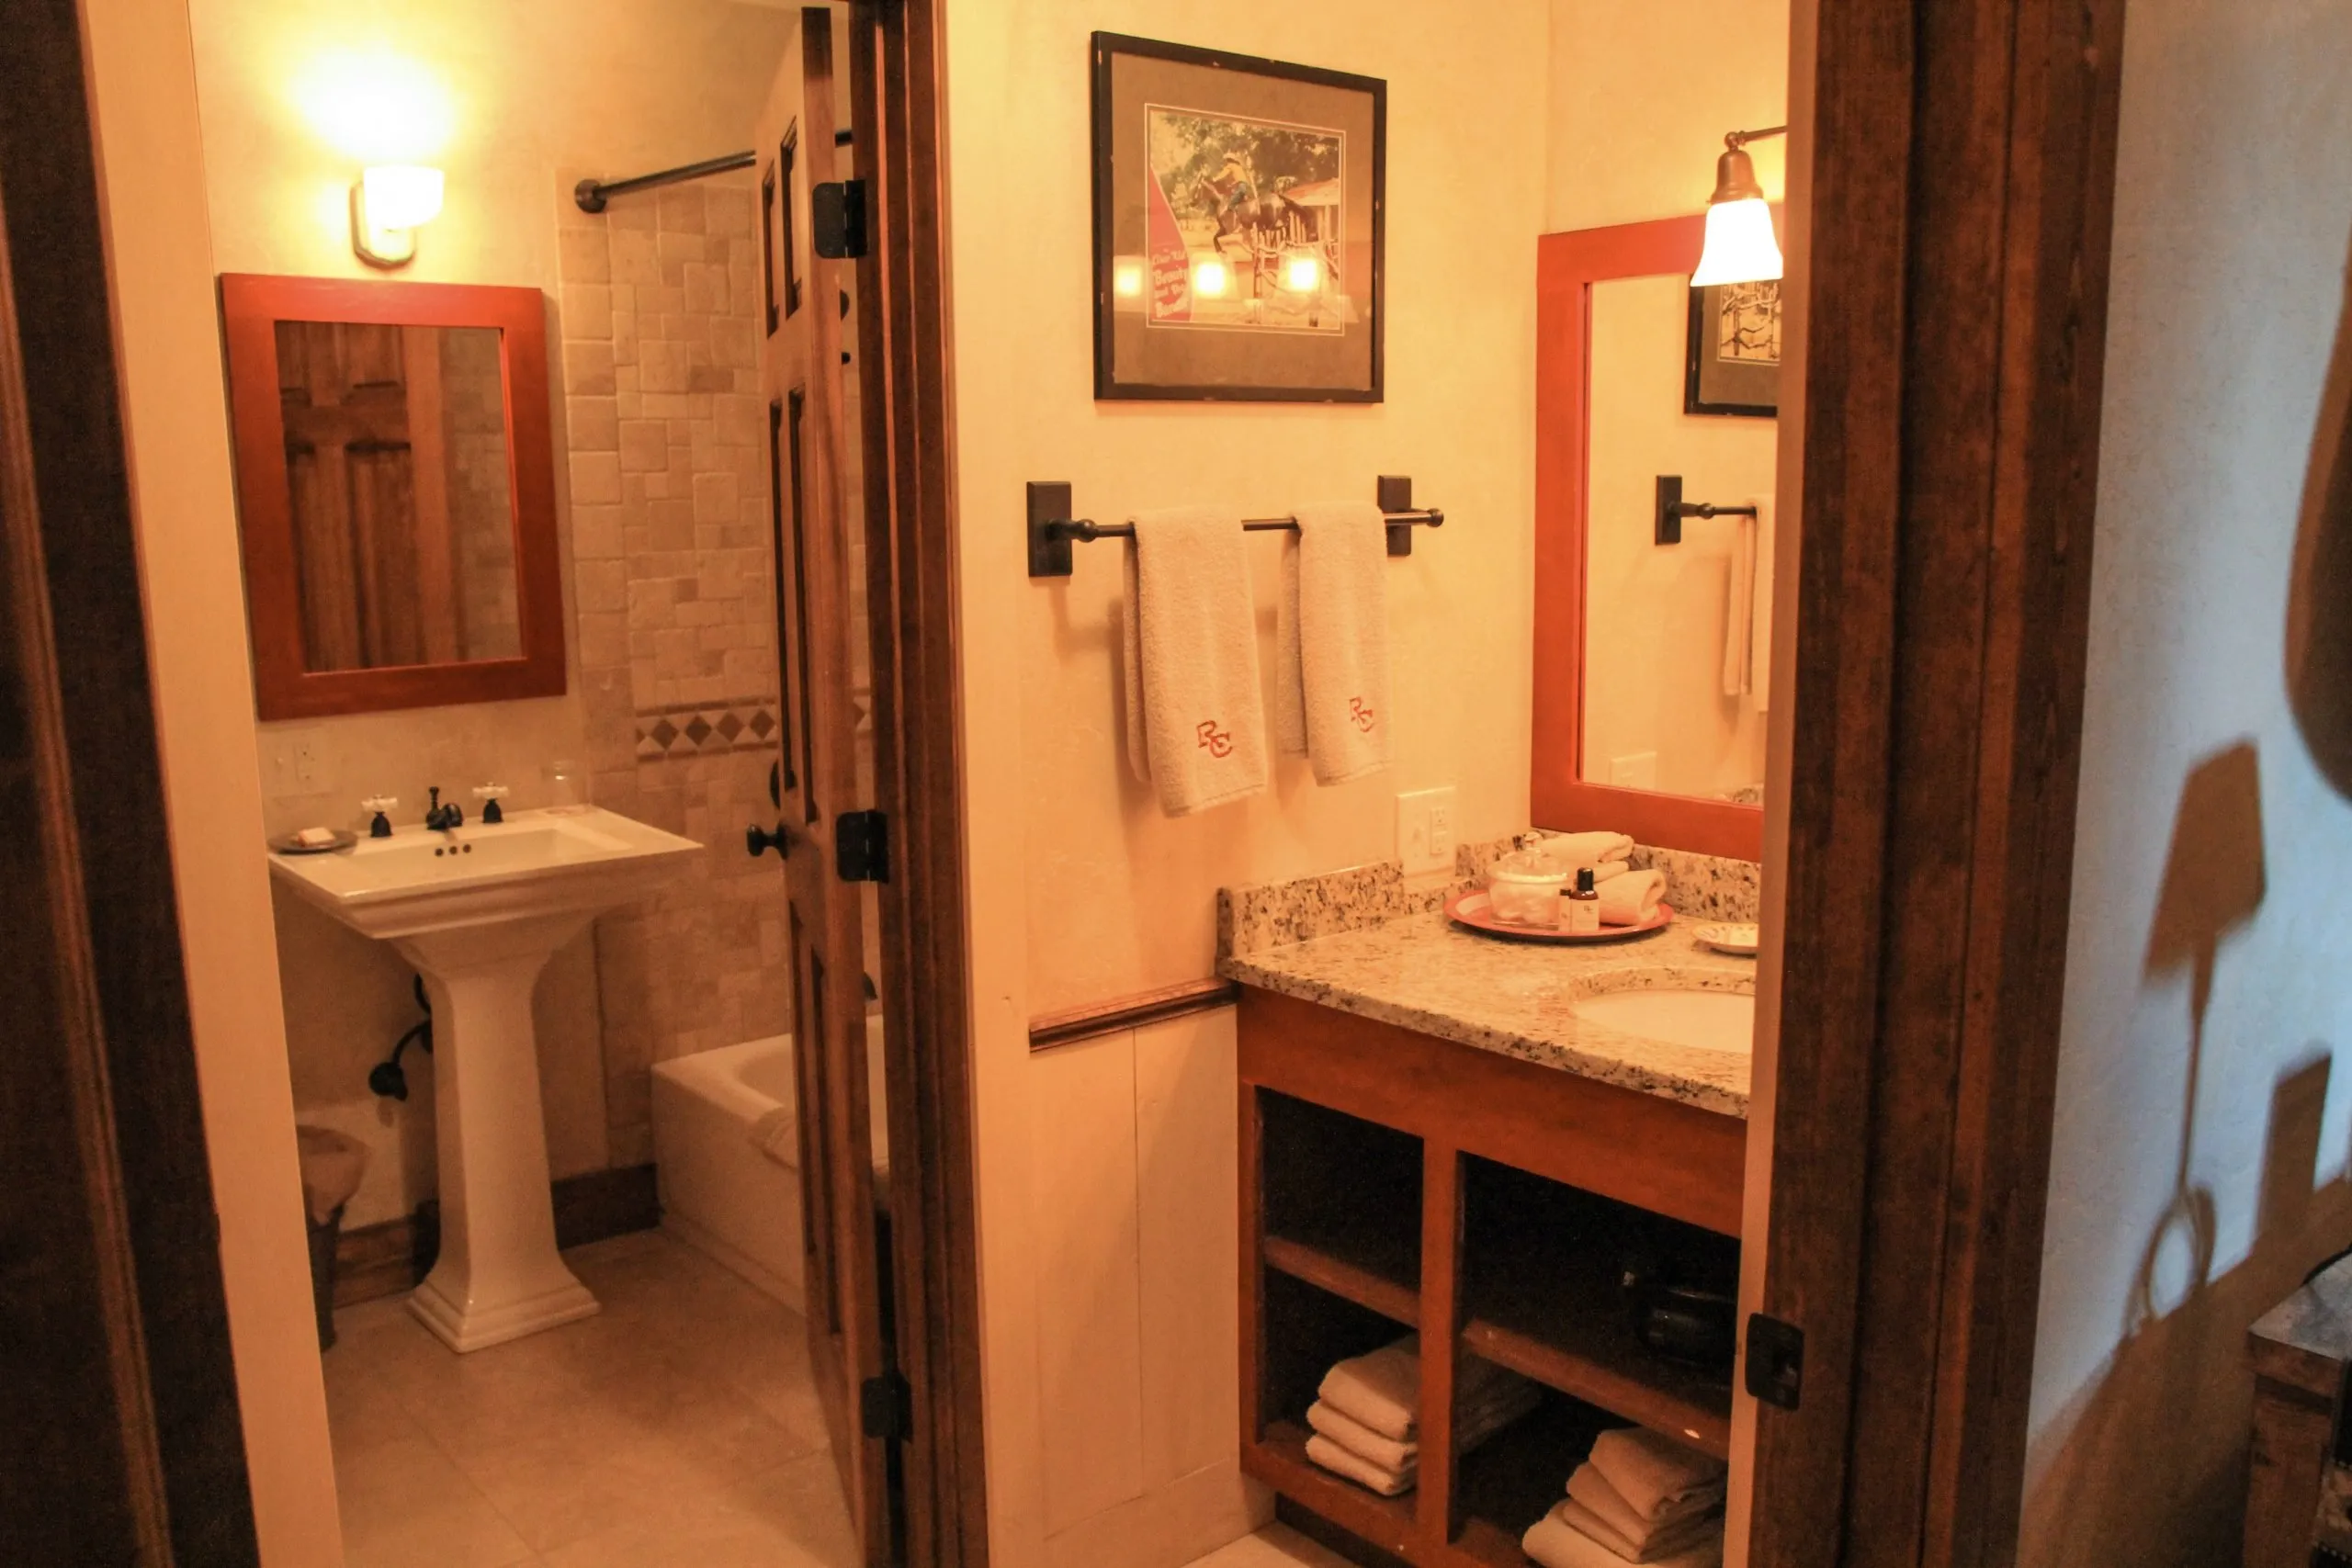 Bathroom with pedestal sink and mirror